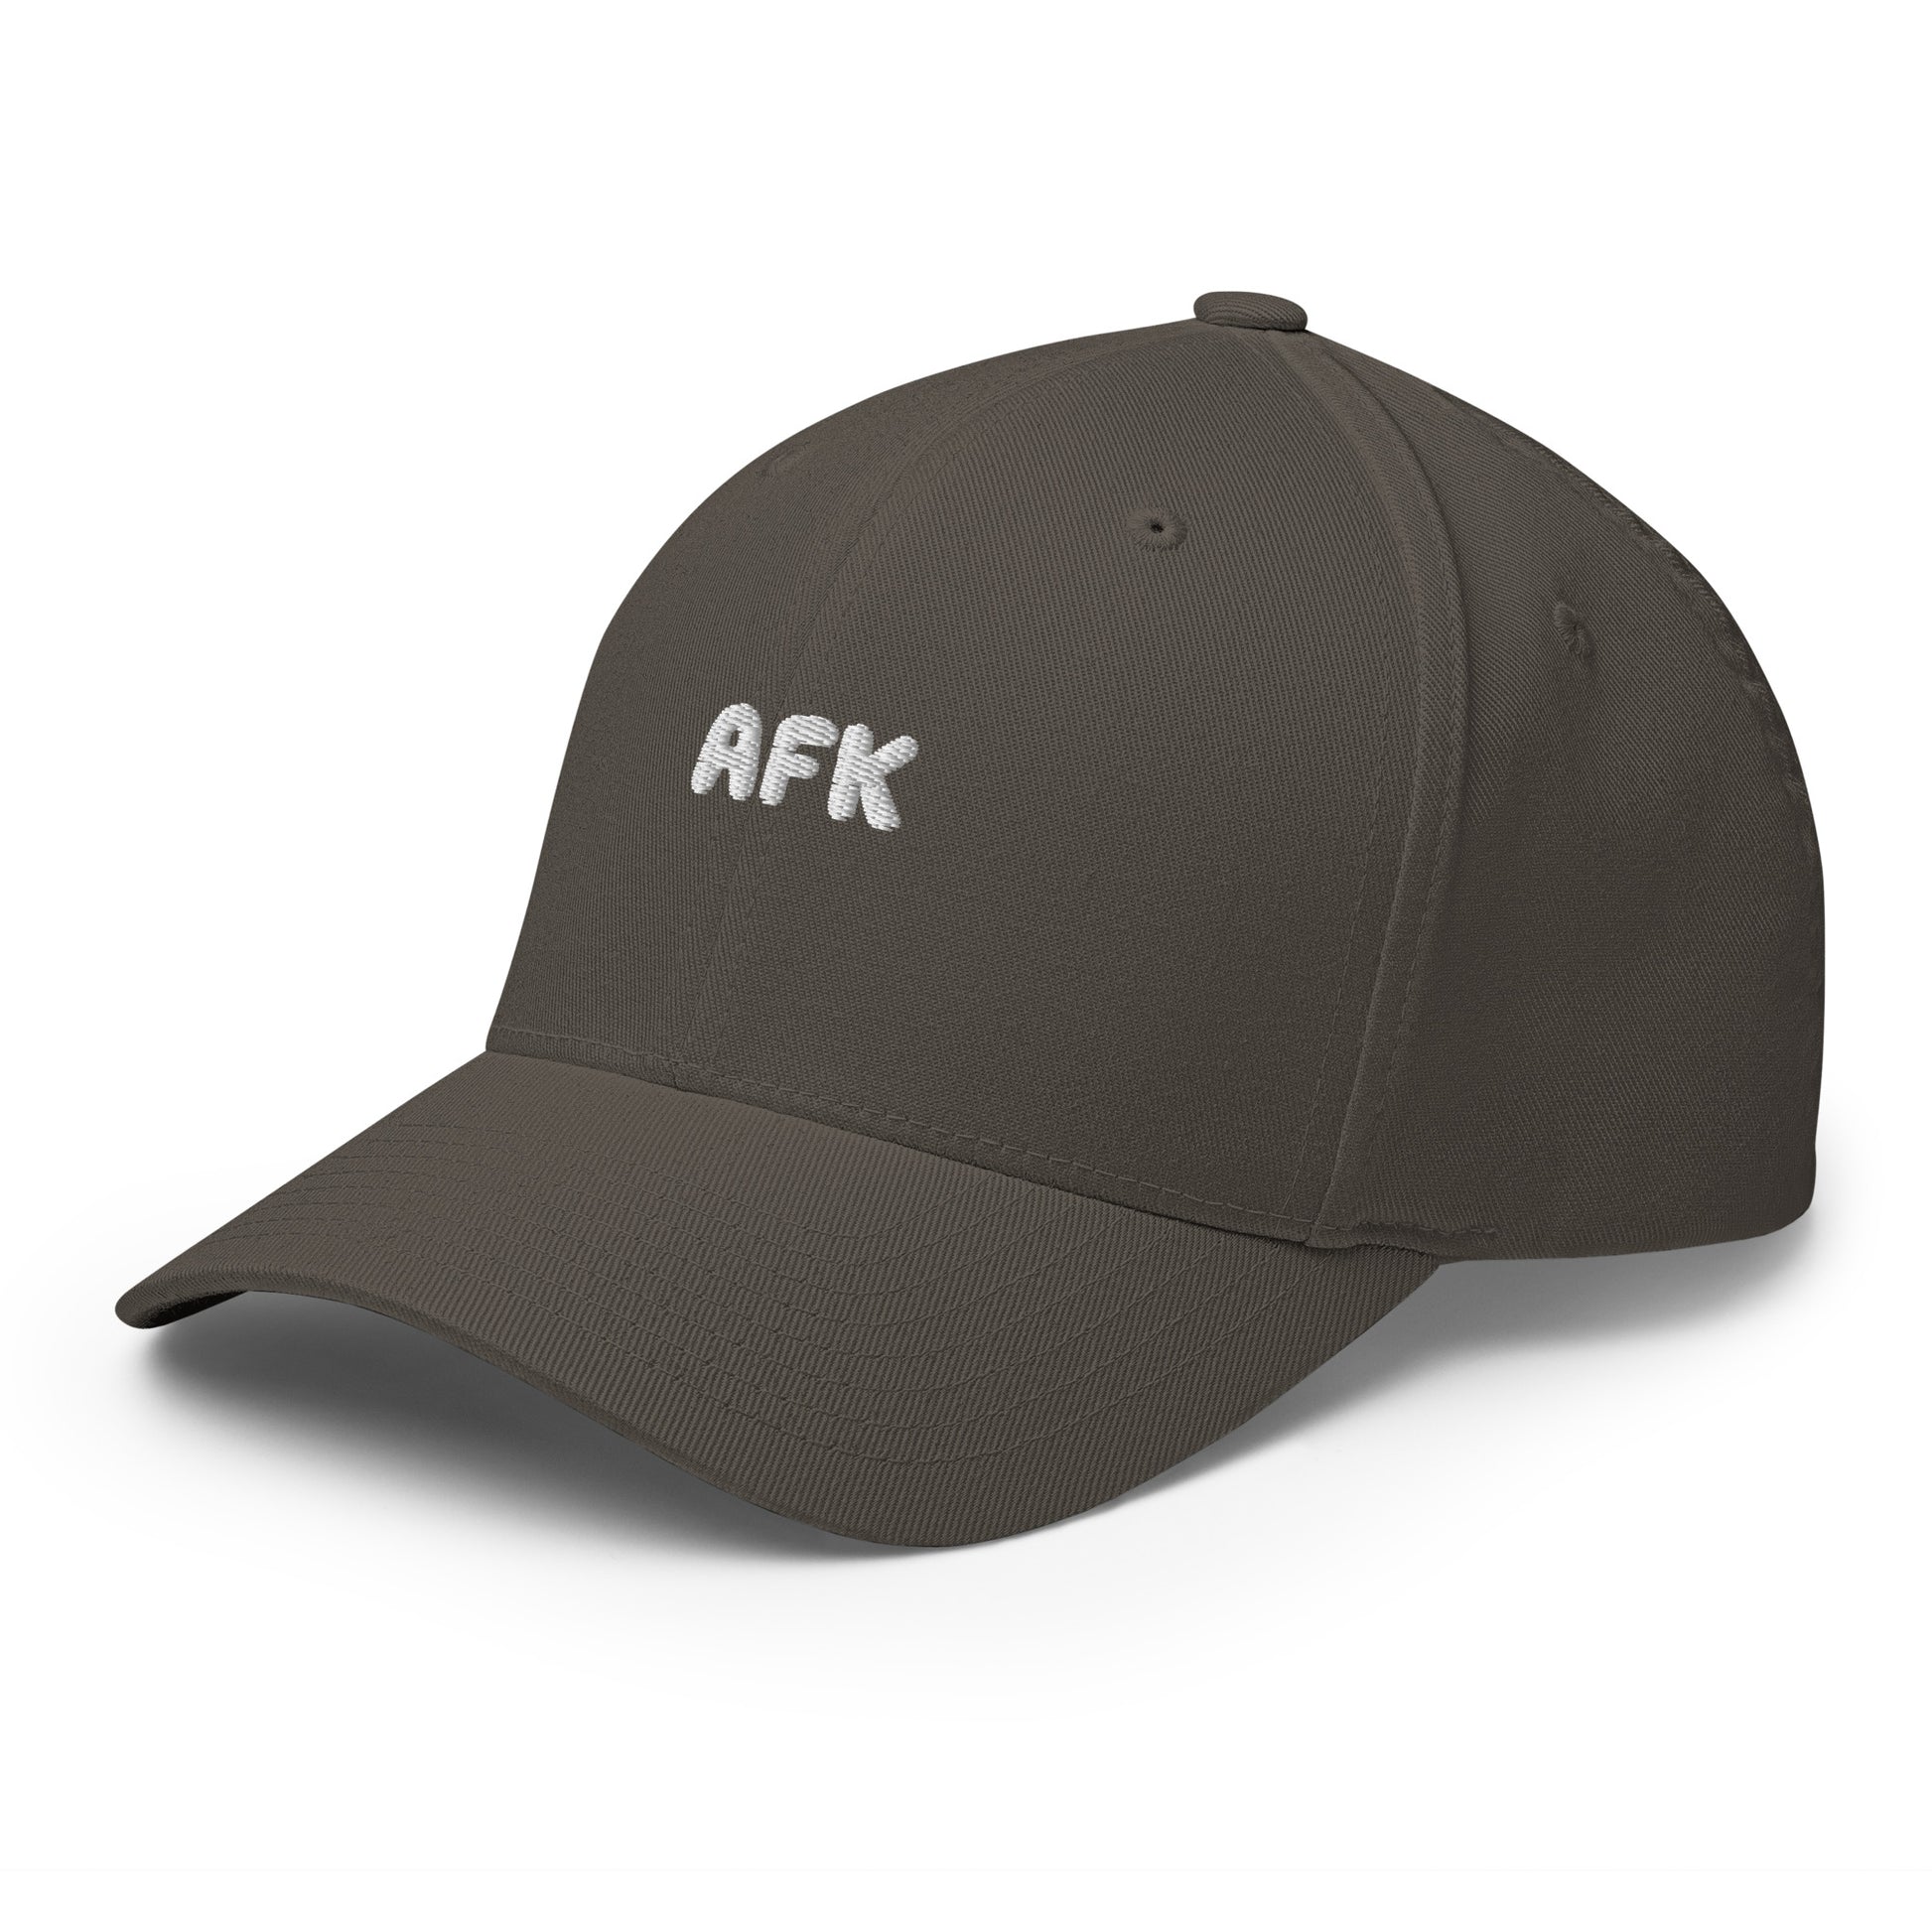 cap-from-the-front-with-afk-symbol